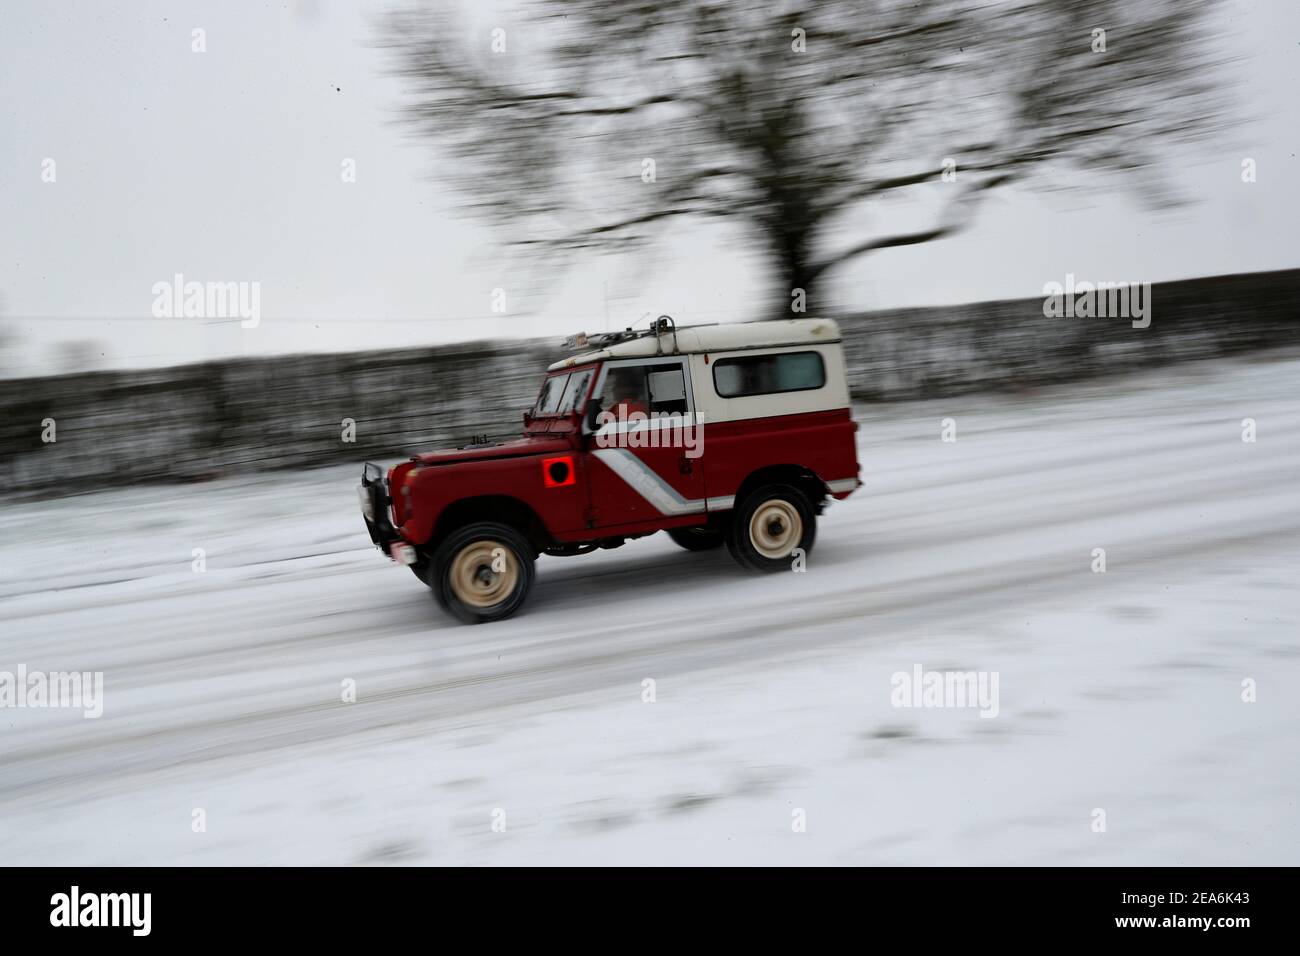 Uppingham, Rutland, UK. 8th February 2021. UK weather. A driver from Leicestershire and Rutland 4x4 Response arrives to pull motorists up a snow and ice covered hill. Credit Darren Staples/Alamy Live News. Stock Photo